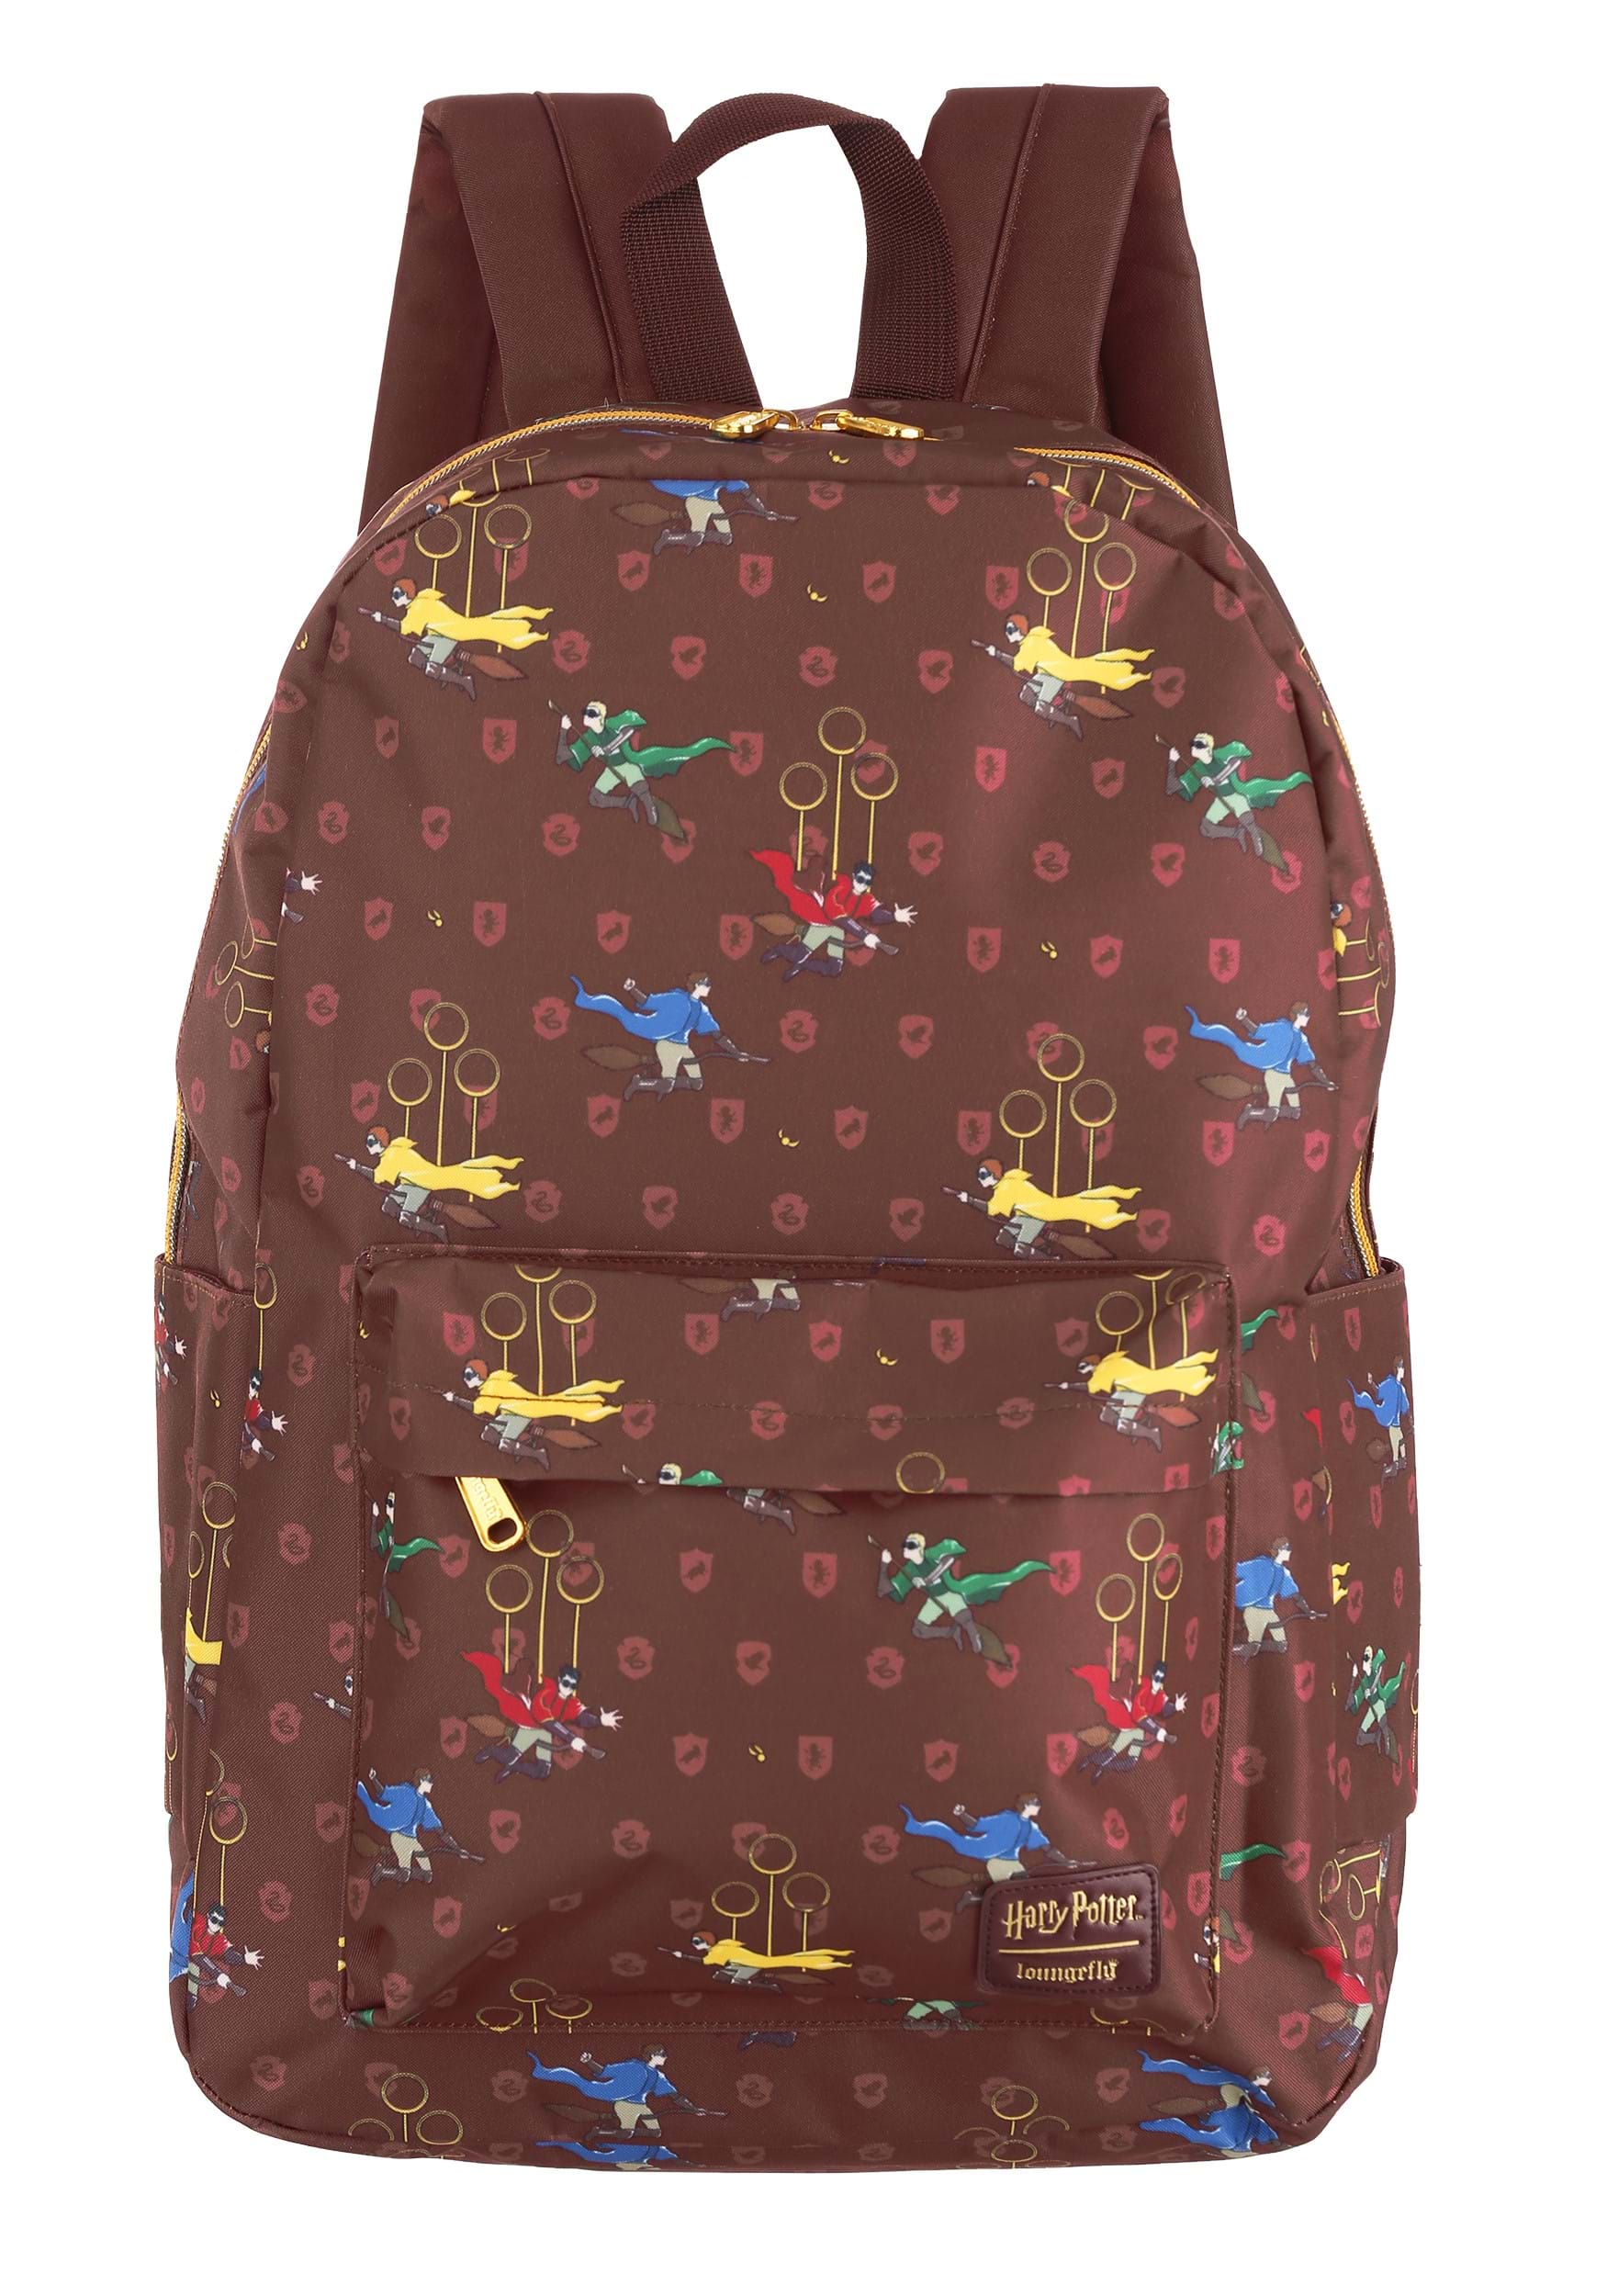 Harry Potter Brown Quidditch Backpack